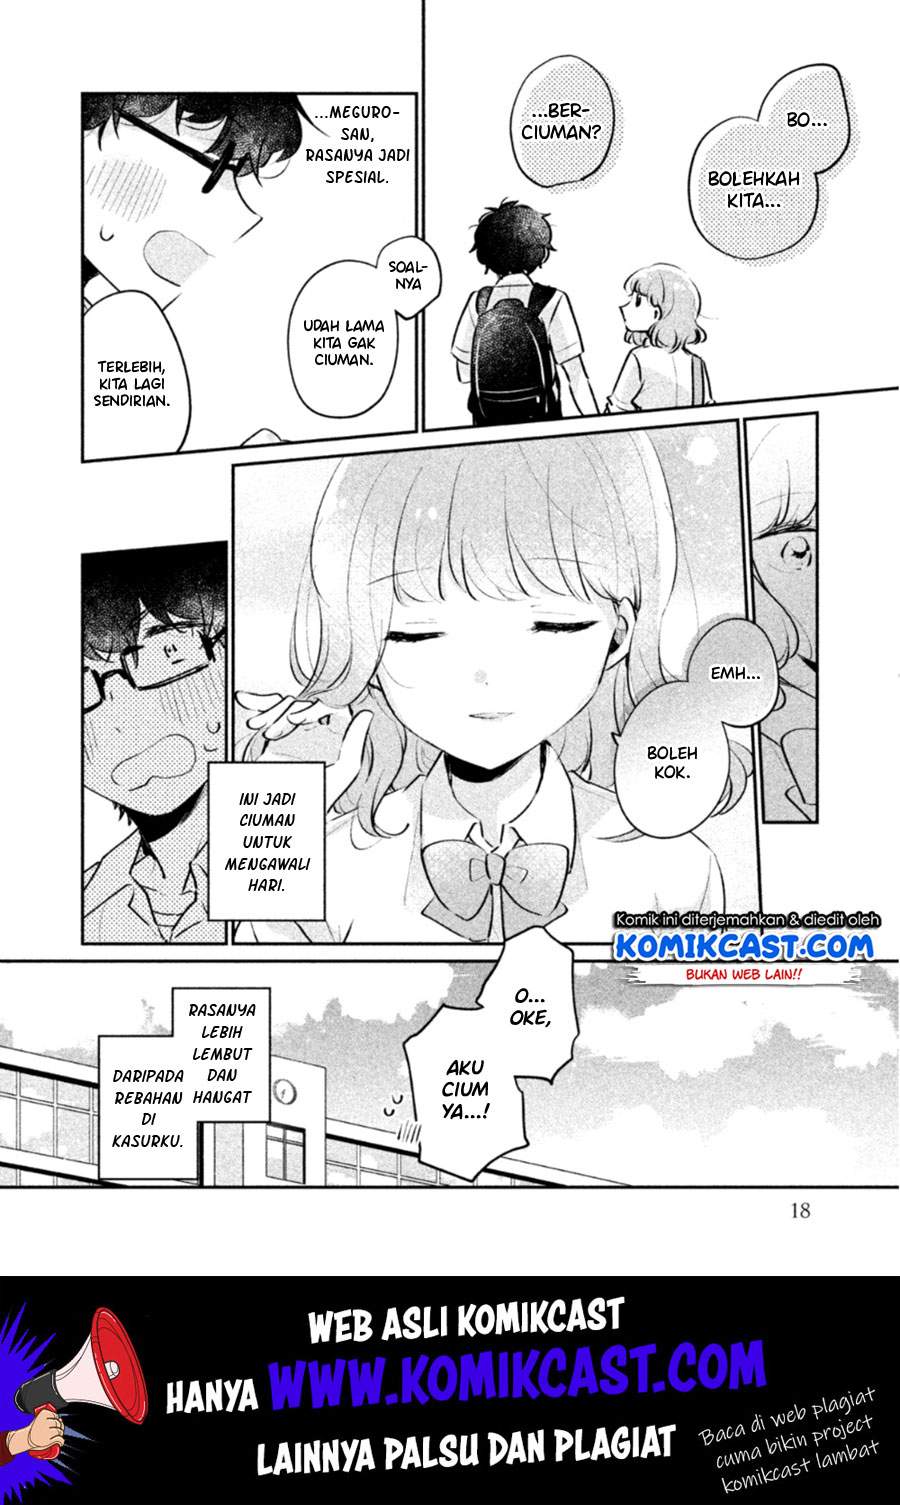 It’s Not Meguro-san’s First Time Chapter 18 Bahasa Indonesia